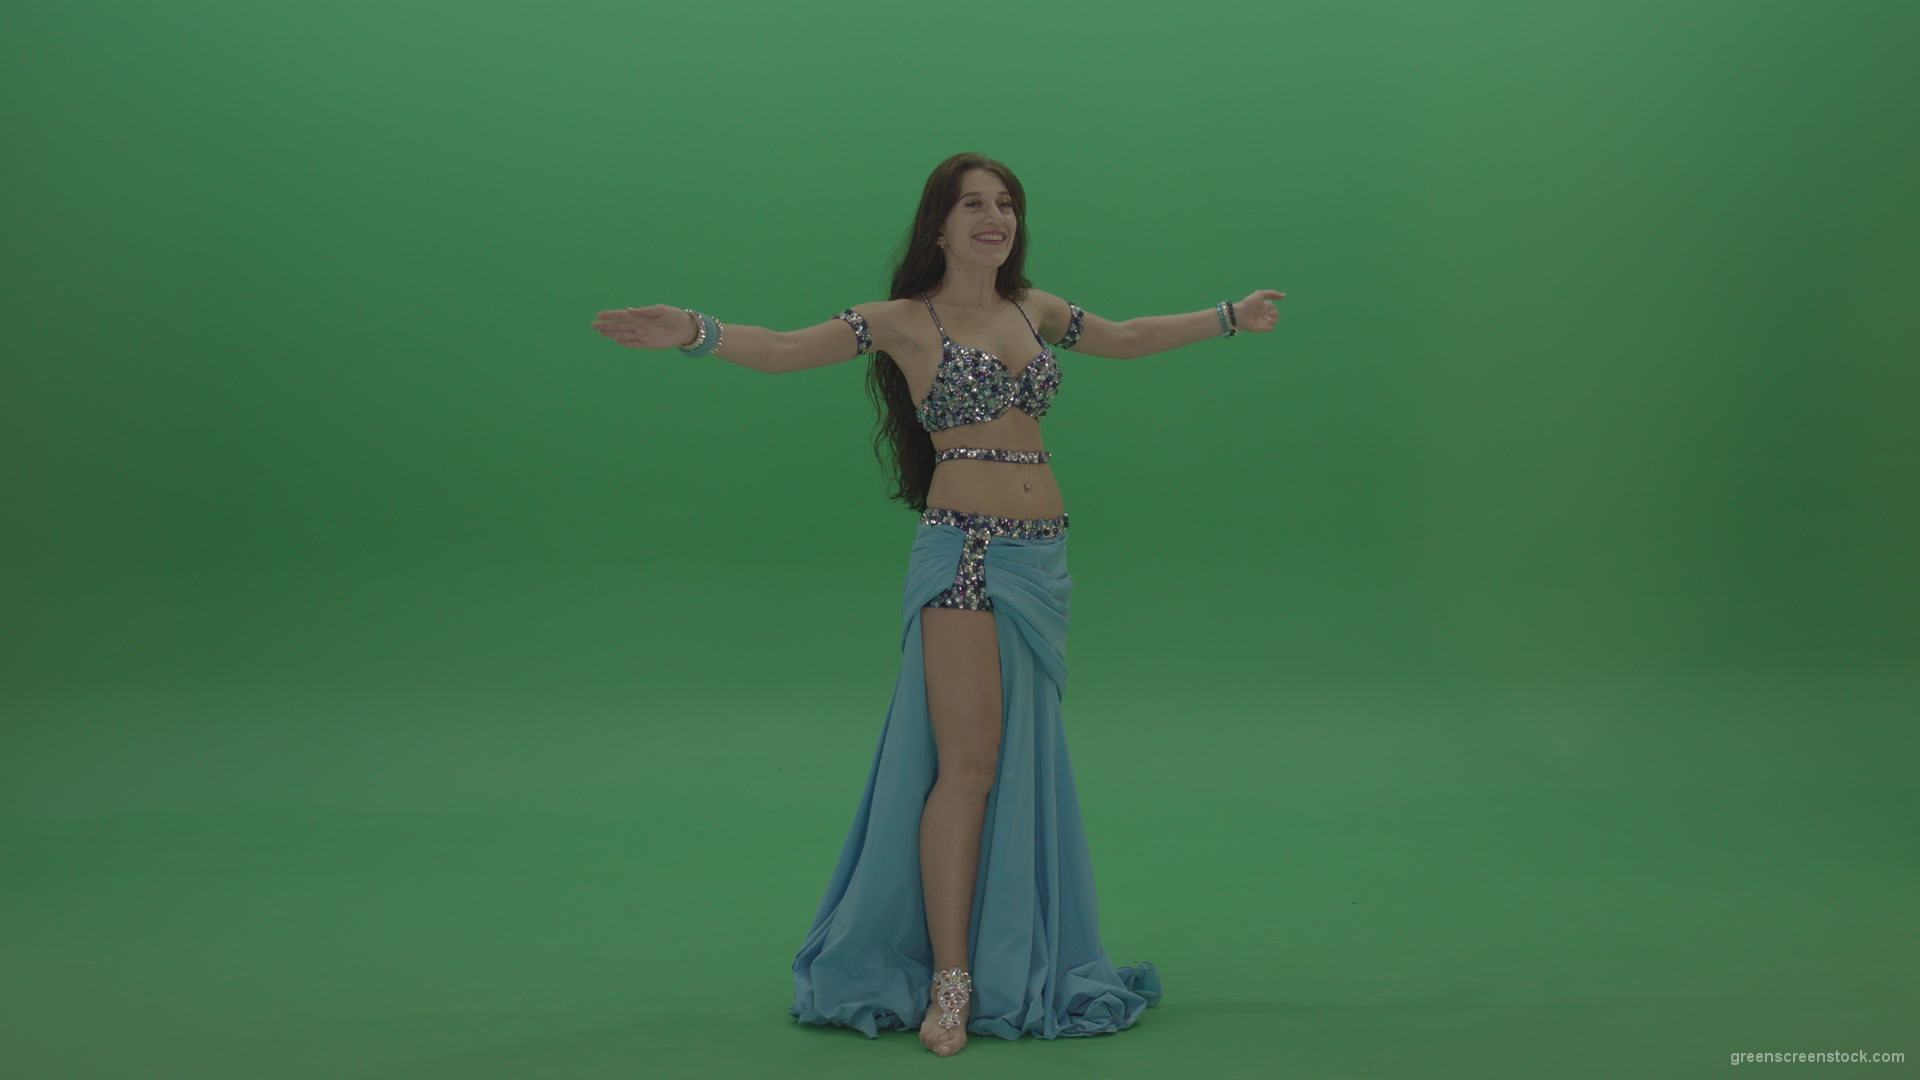 Awesome-belly-dancer-in-blue-wear-display-amazing-dance-moves-over-chromakey-background_002 Green Screen Stock